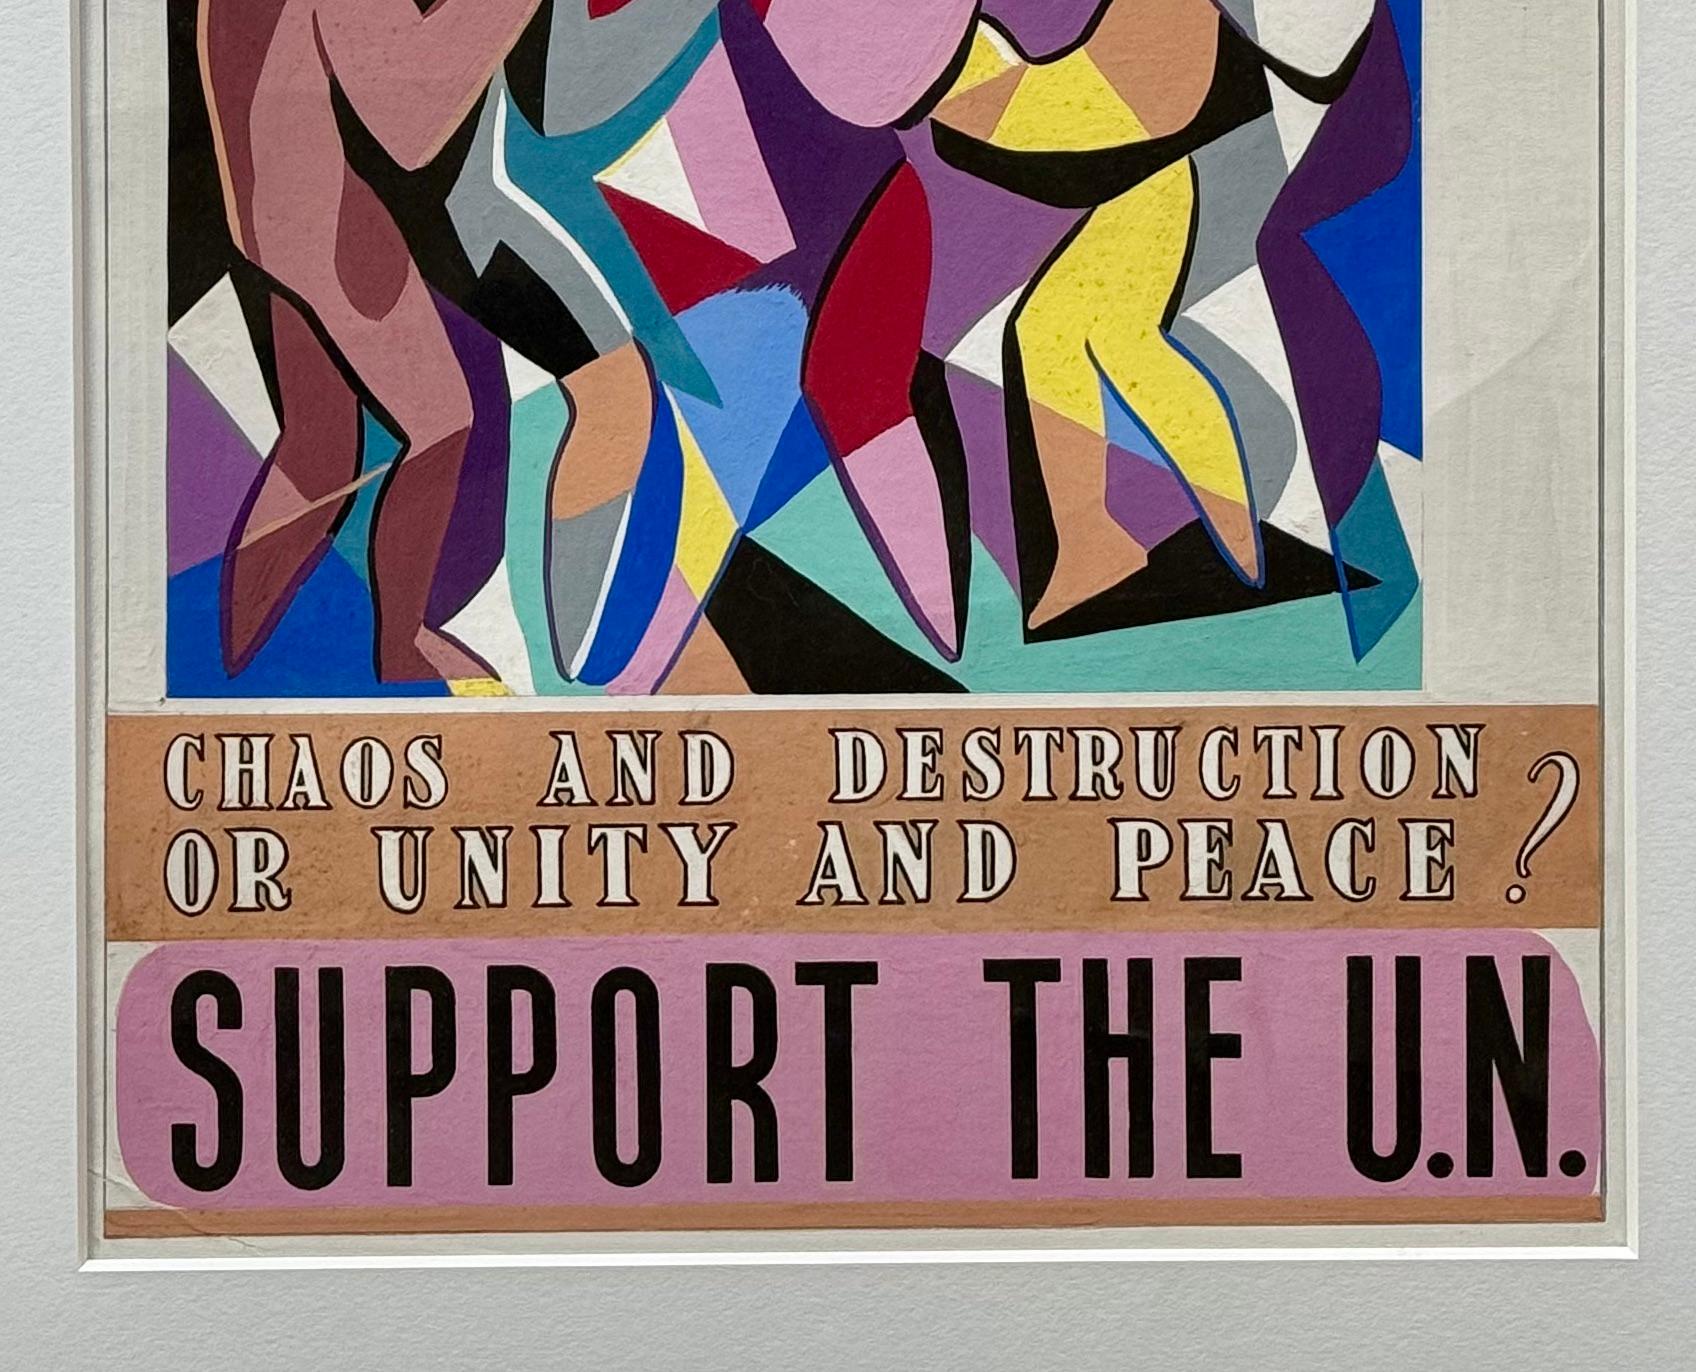 UN Poster Design American Scene Mid 20th Century Modernism WPA World Peace

Jo Cain (1904 – 2003)
We Are All Members of the Human Race: UN Poster Proposal
21 x 16 inches
Tempera on board, c.1945
Estate stamp verso
30 x 25 inches framed

Our gallery